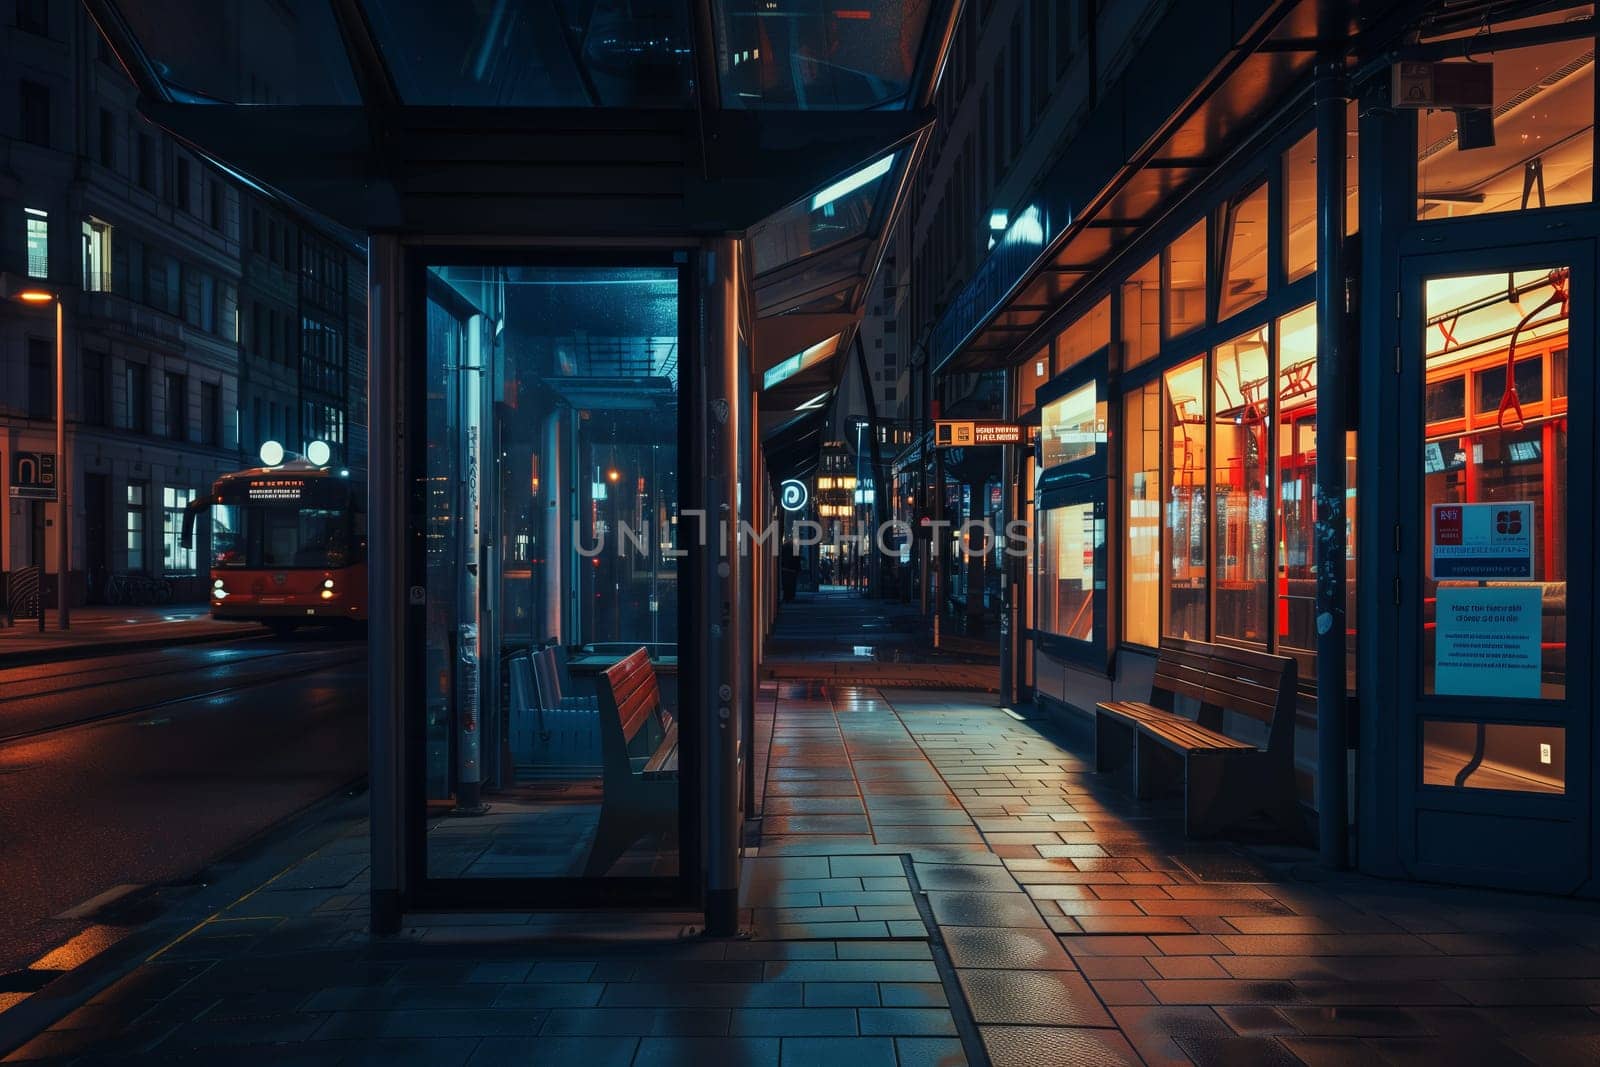 In the darkness of the city night, a bus stop with a phone booth stands in symmetry on the street. The electric blue tints and shades reflect off the glass facade of the building